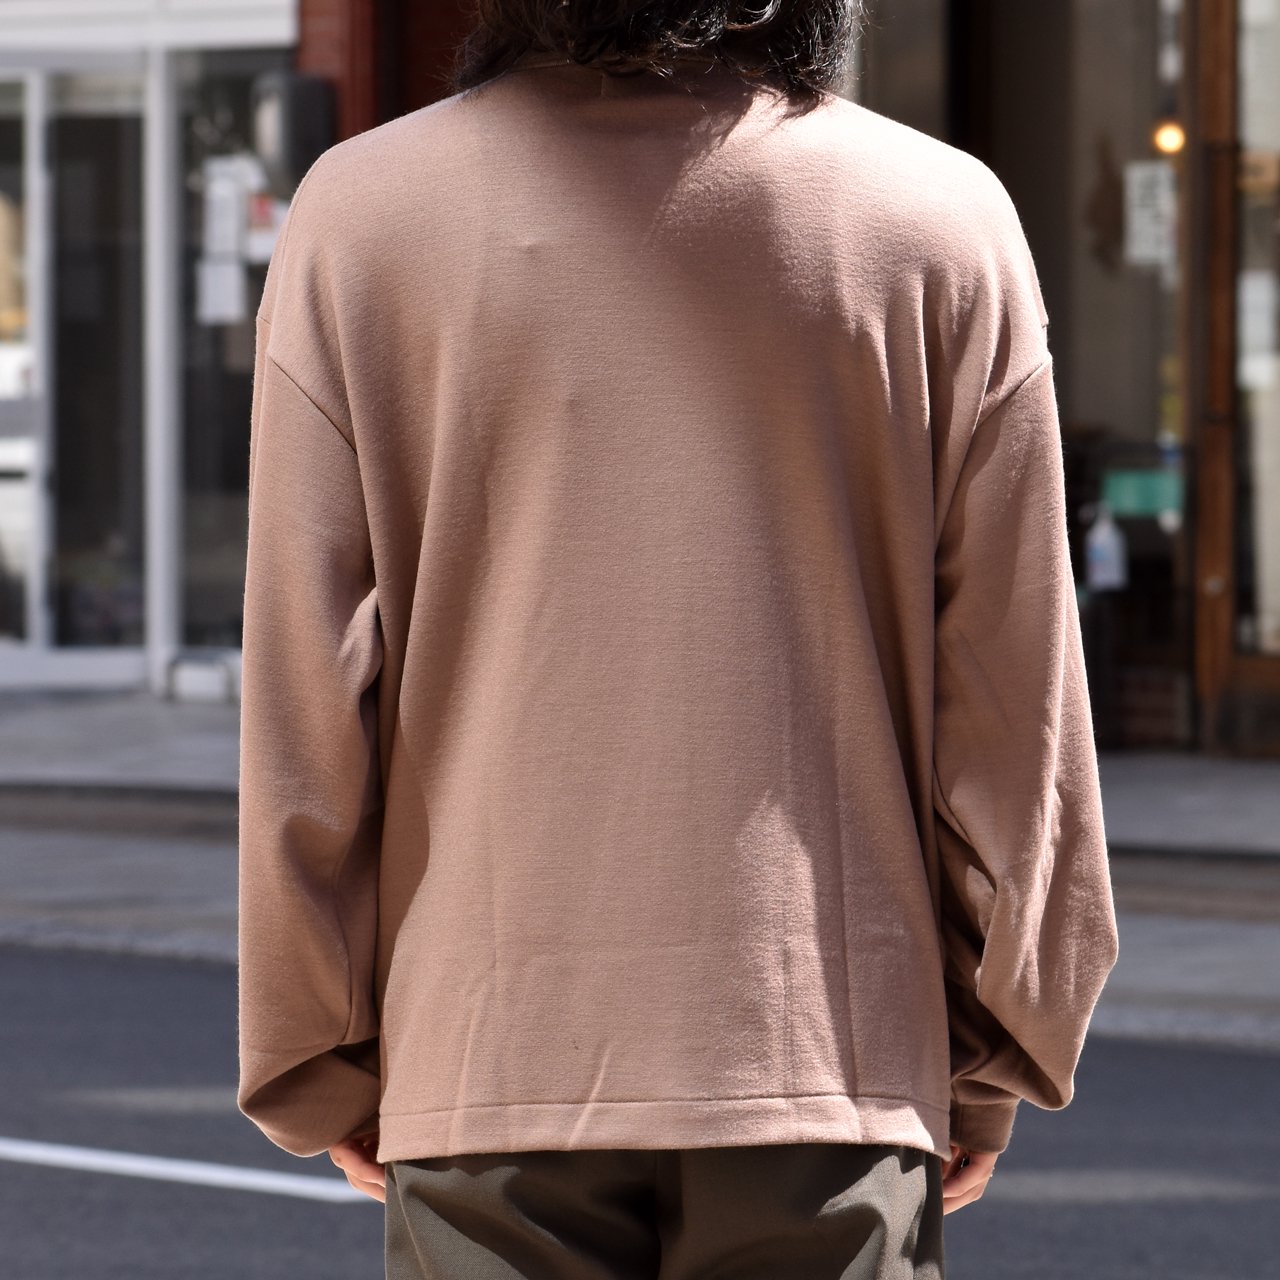 50%OFF marka (マーカ)｜POLO CARDIGAN BEIGE -SUPER140's WOOL DOUBLE JERSEY WASHABLE-
